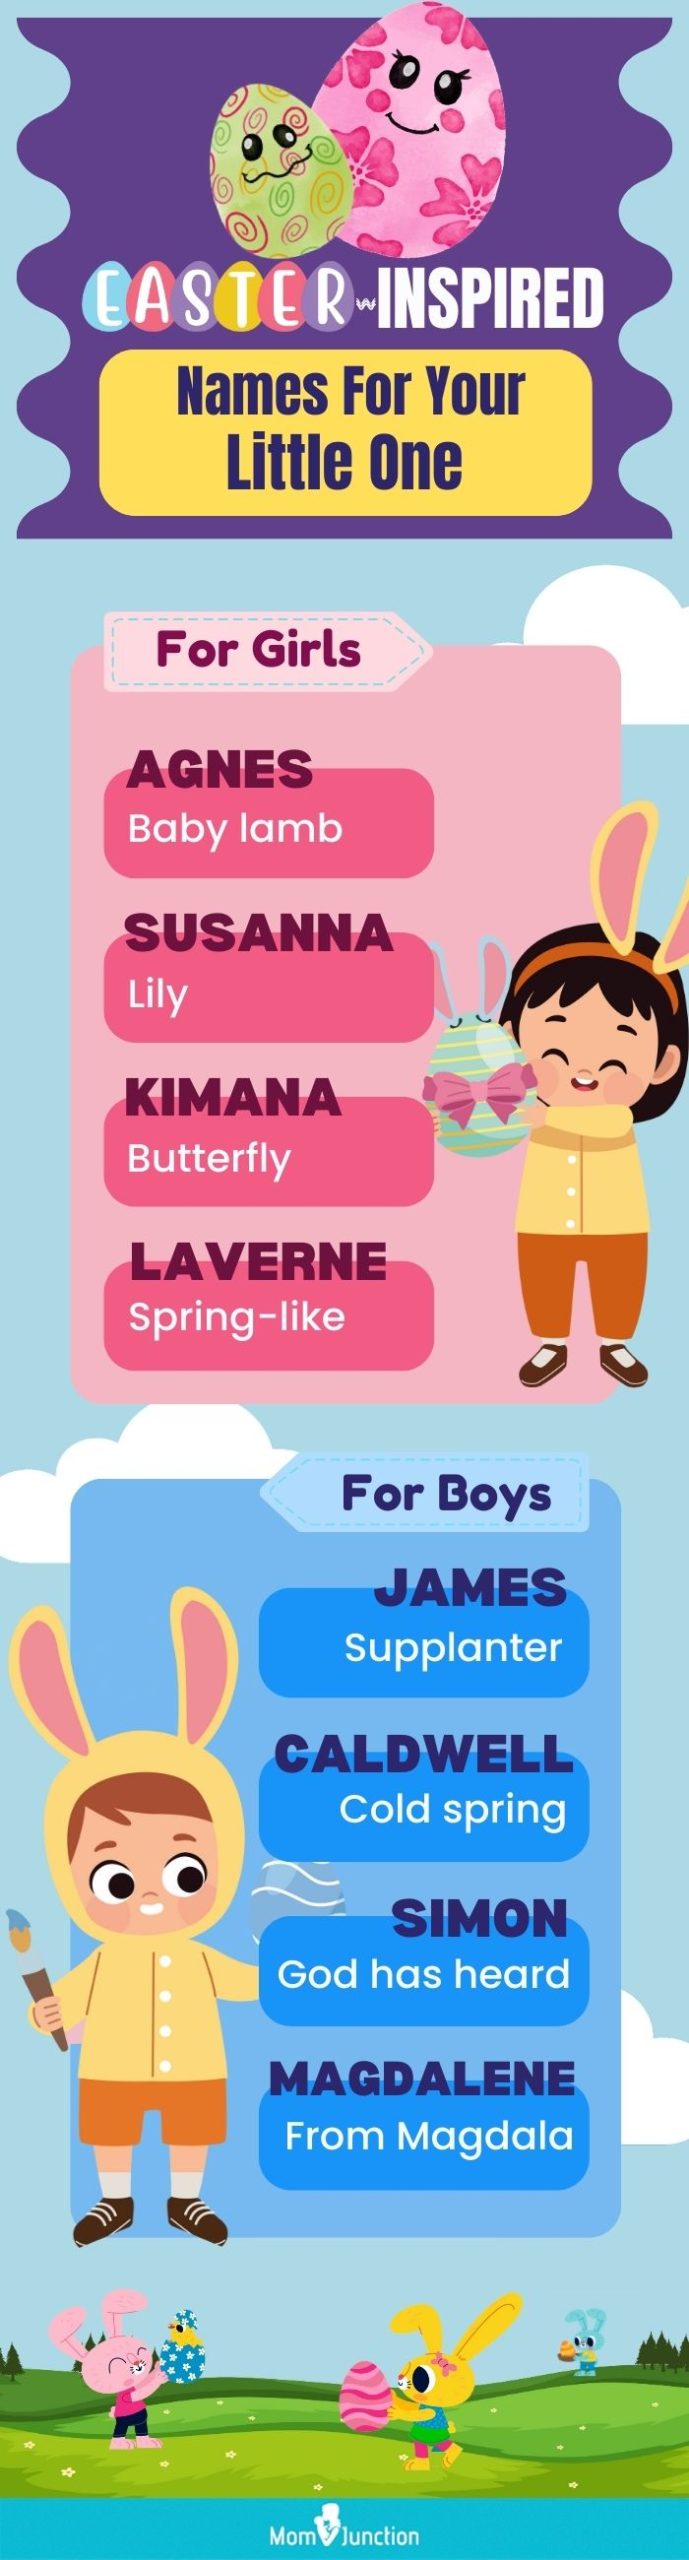 easter inspired names for your little one (infographic)